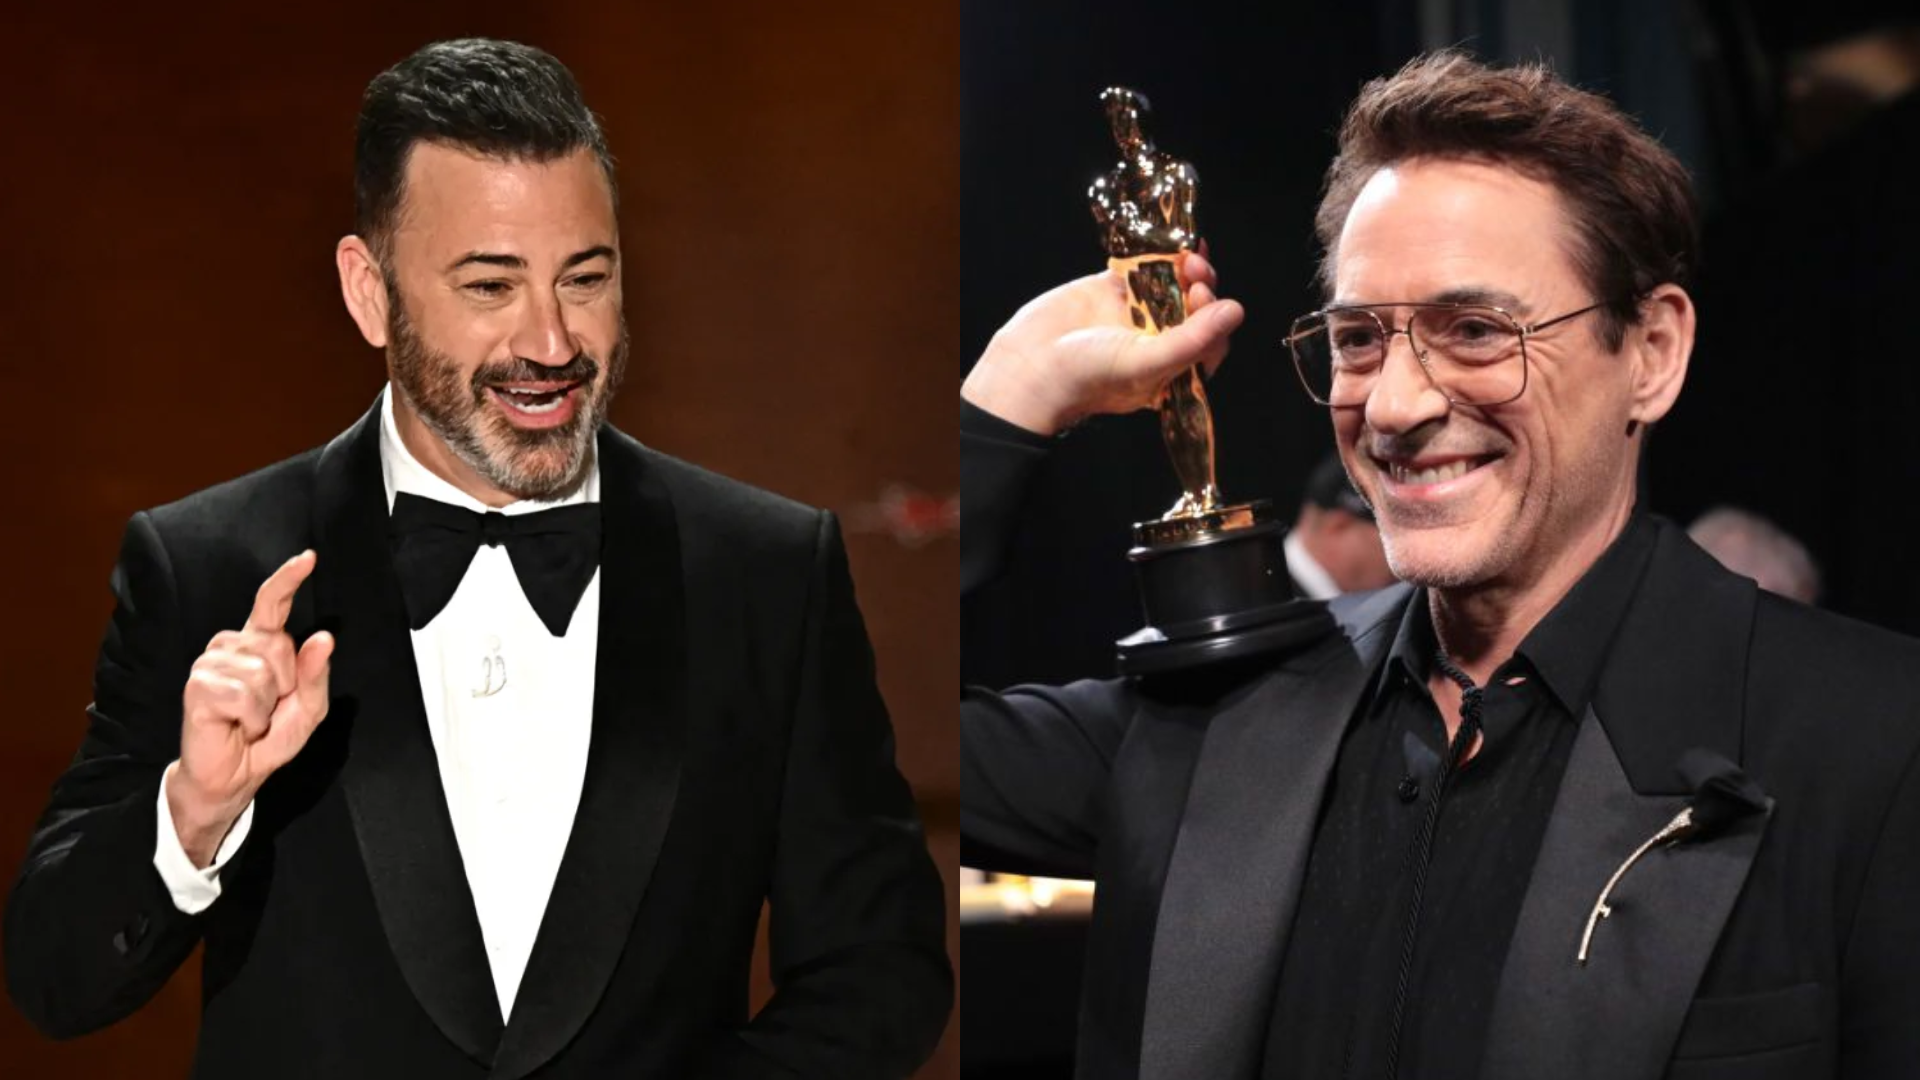 Robert Downey Jr Appears To Be Annoyed And Unimpressed After Jimmy Kimmel Brings Up Actor’s Drug-Fueled Past During Oscars Ceremony